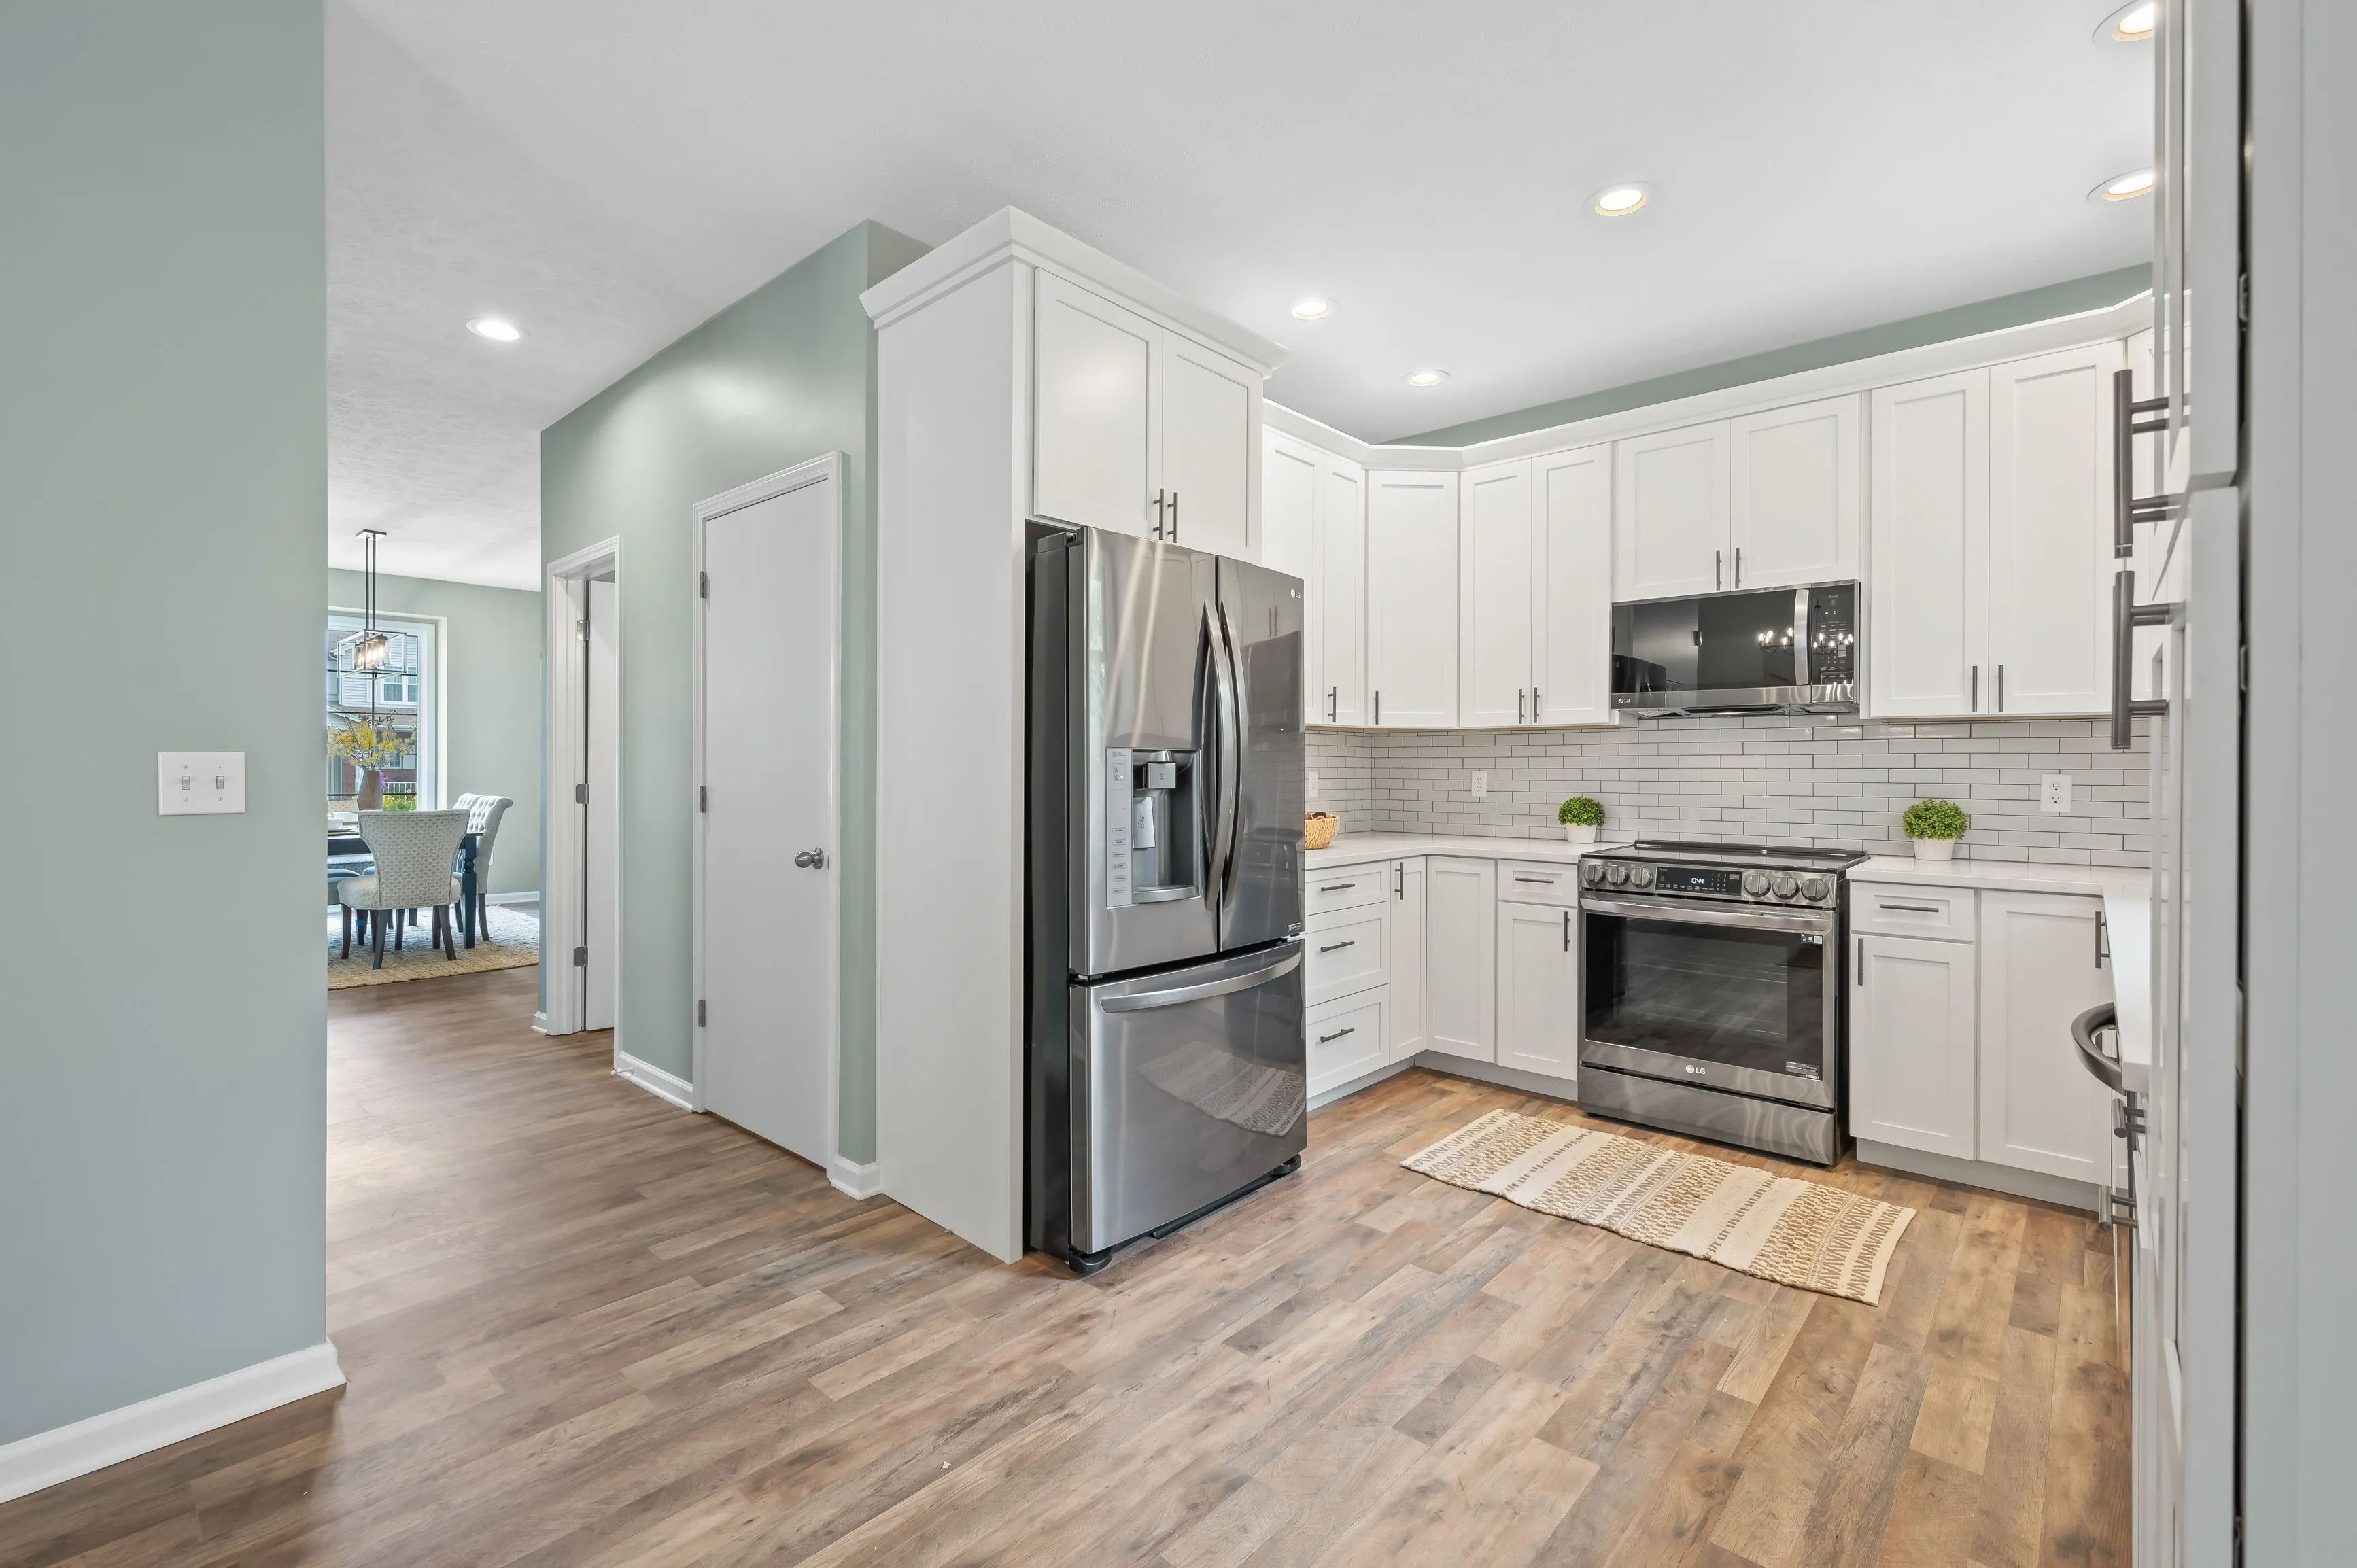 Modern kitchen interior with stainless steel appliances, white cabinets, and hardwood floors.